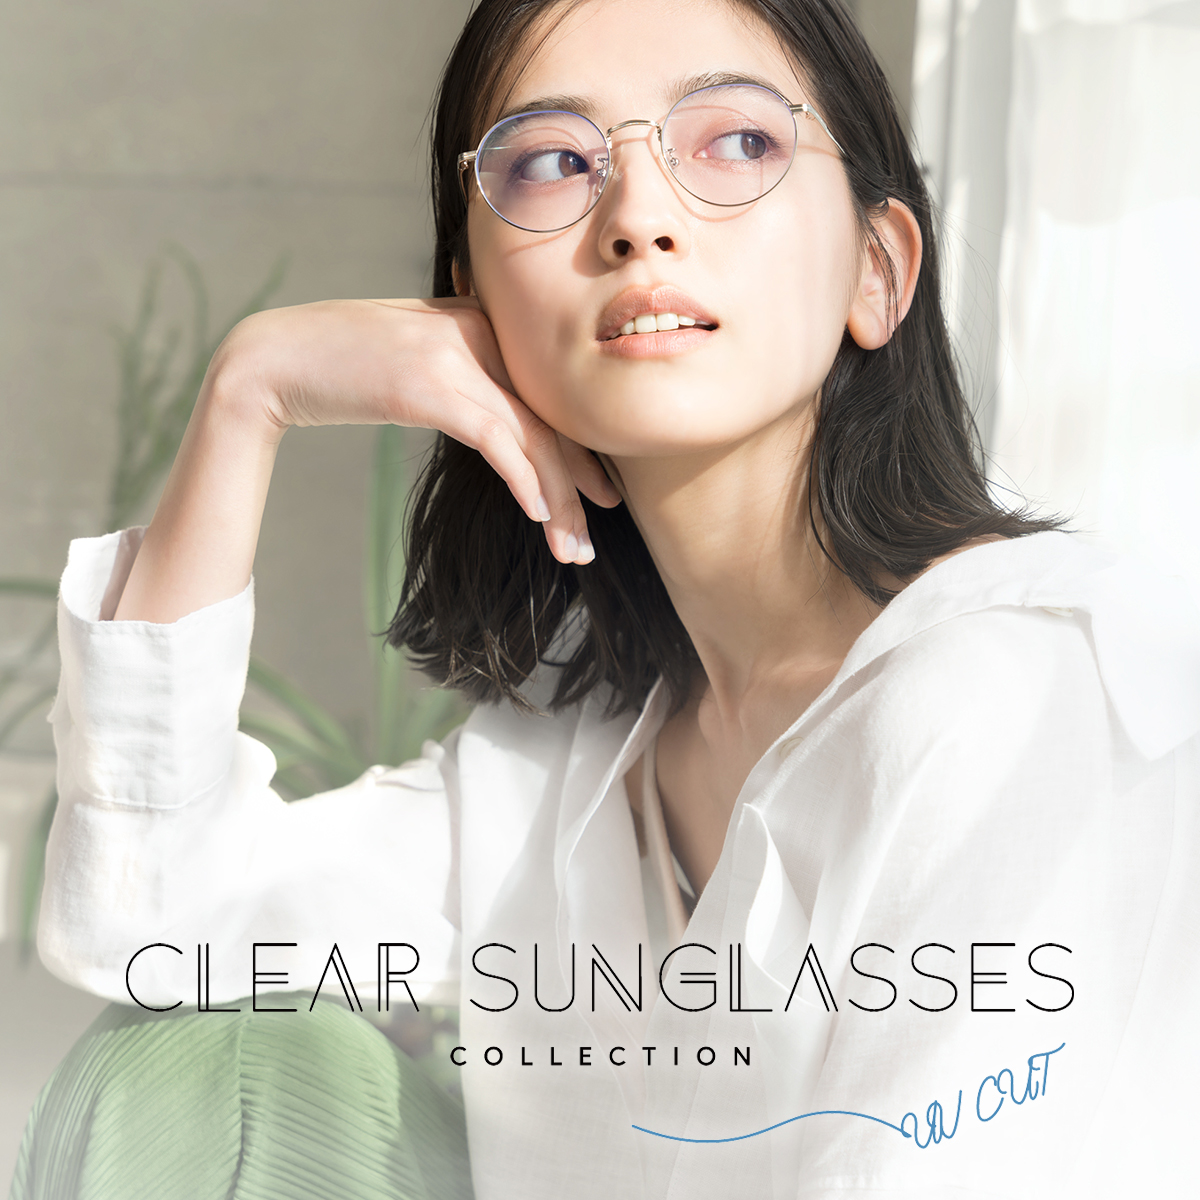 CLEAR SUNGLASSES COLLECTION